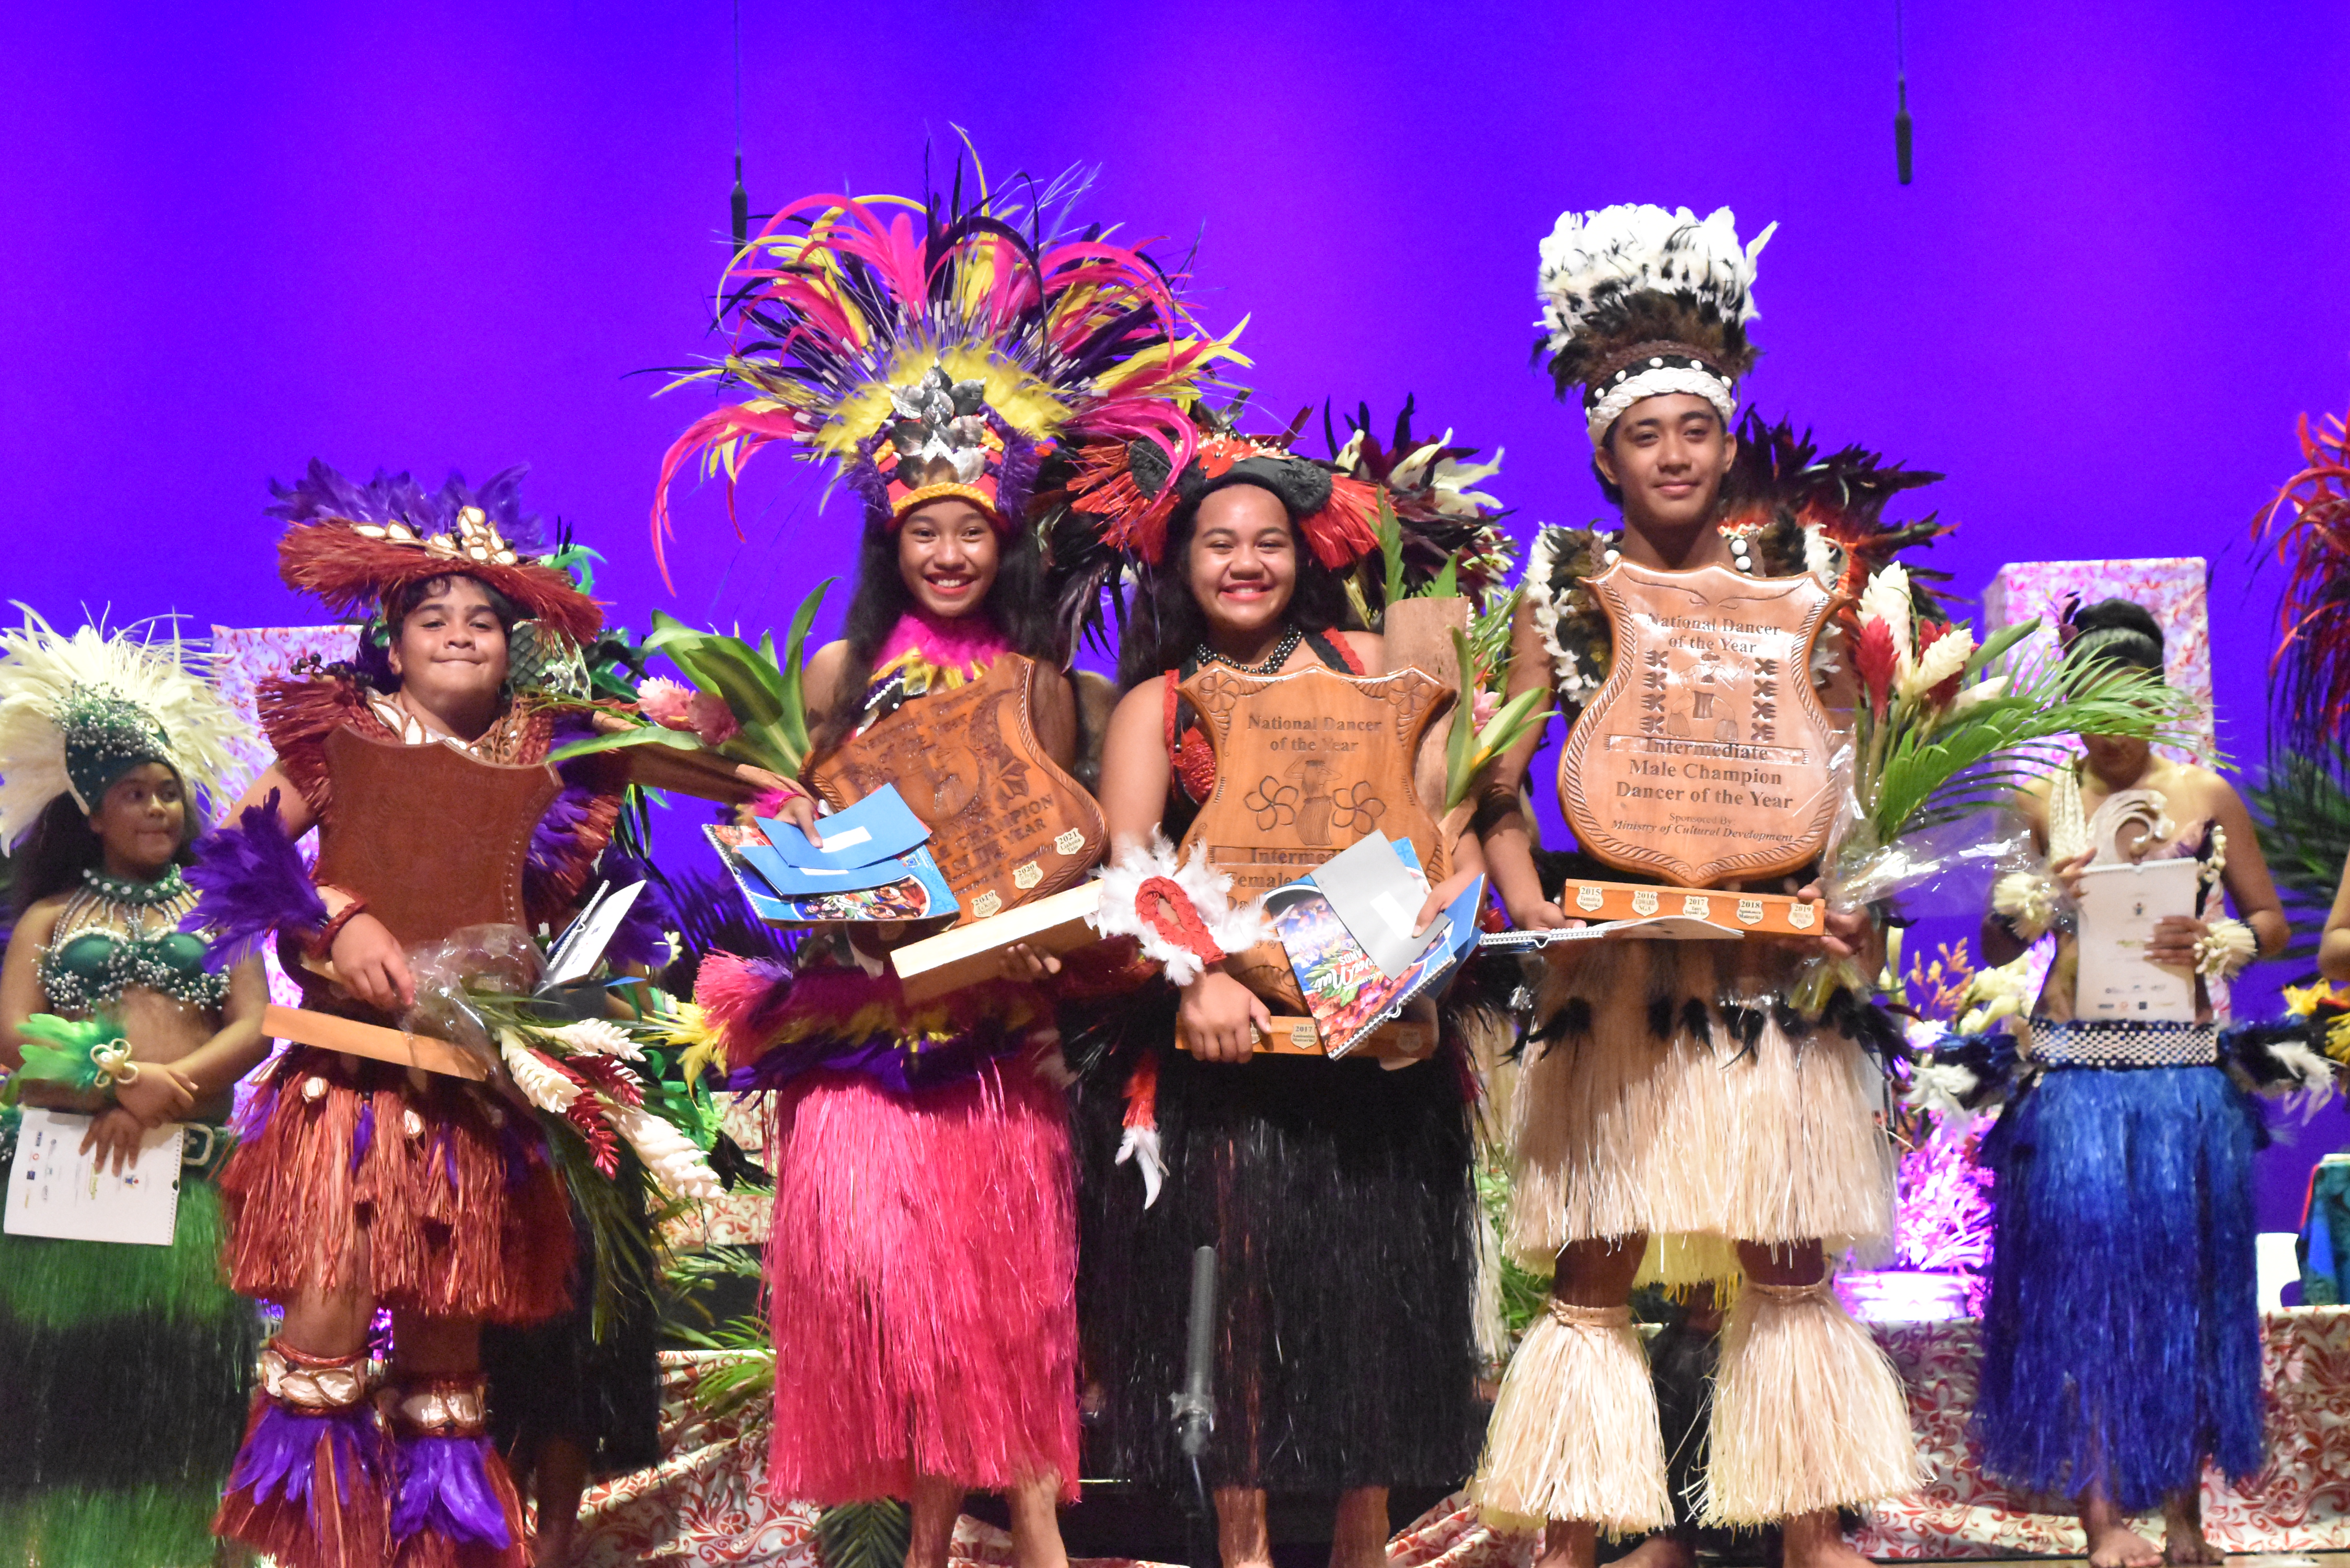 Young dancers steal the show at Te Mire Ura Dancer of the Year comp